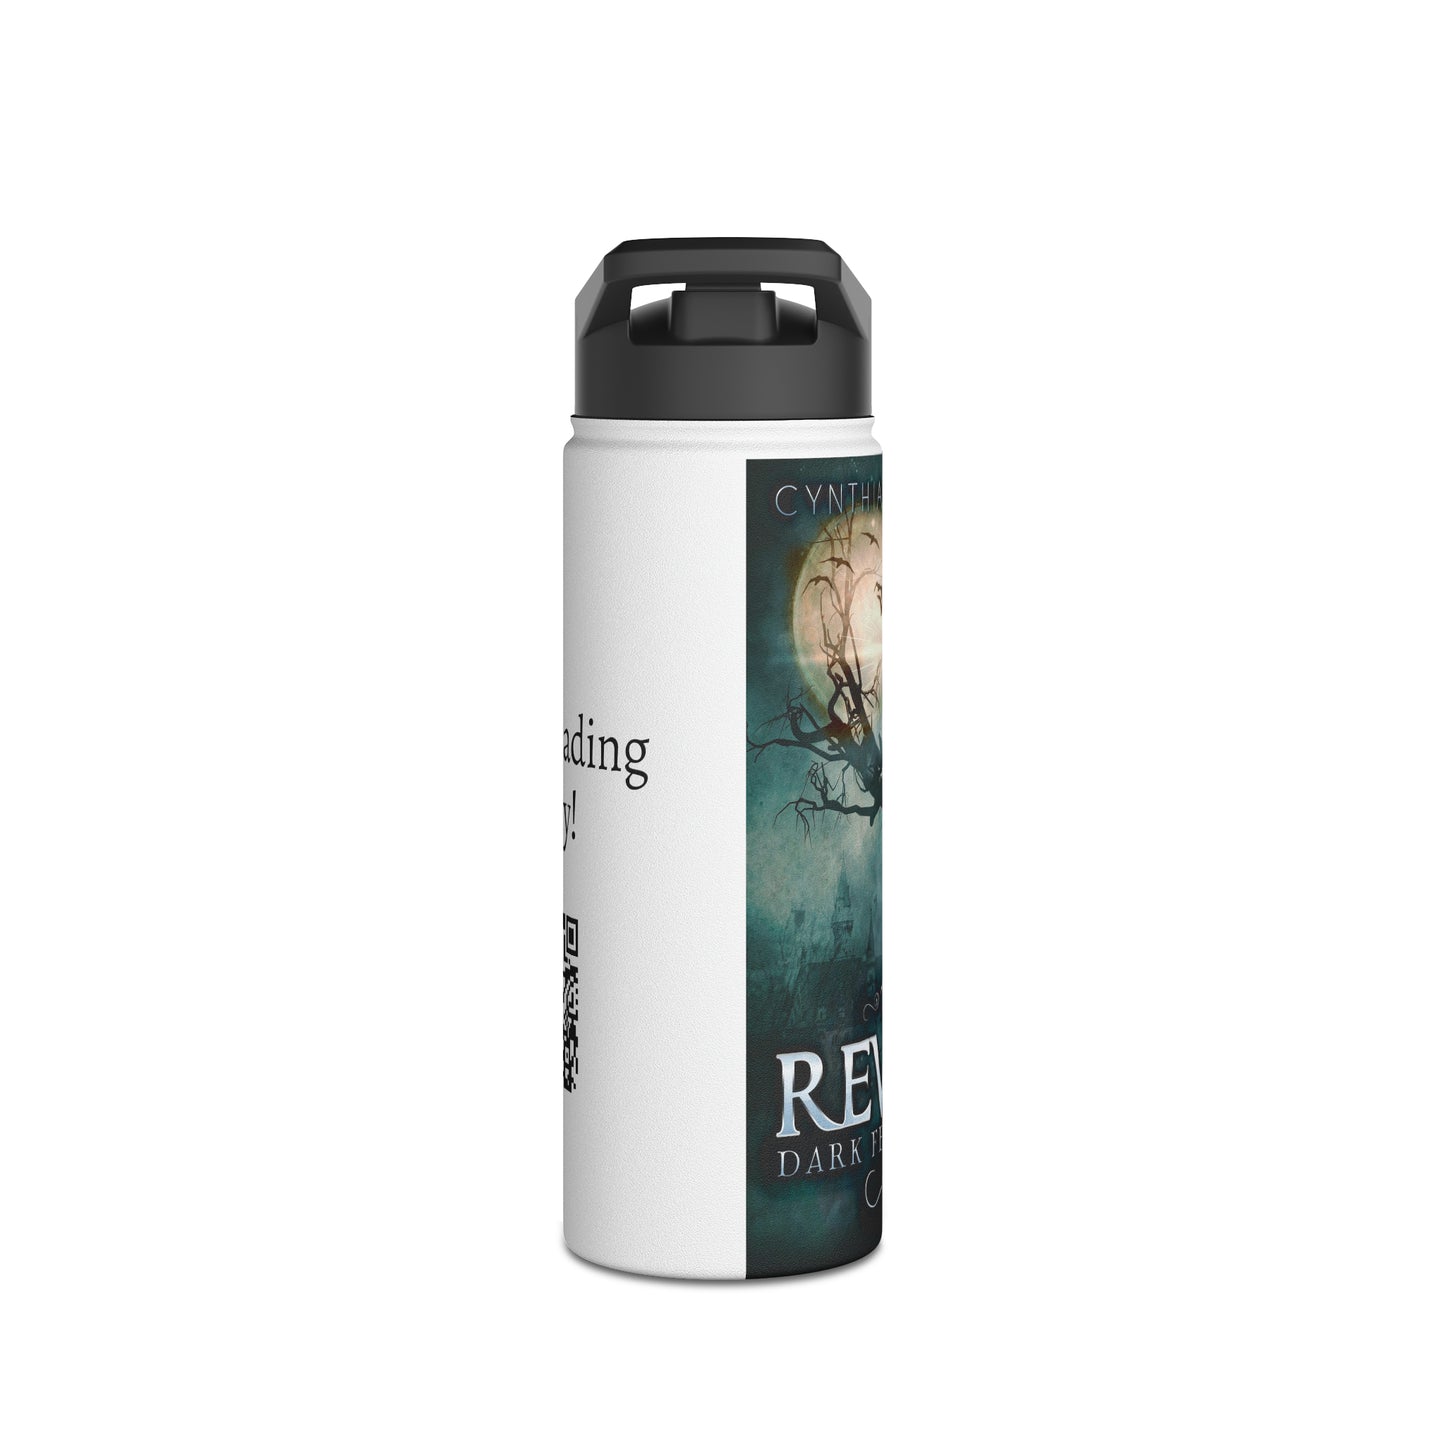 The Reviled - Stainless Steel Water Bottle